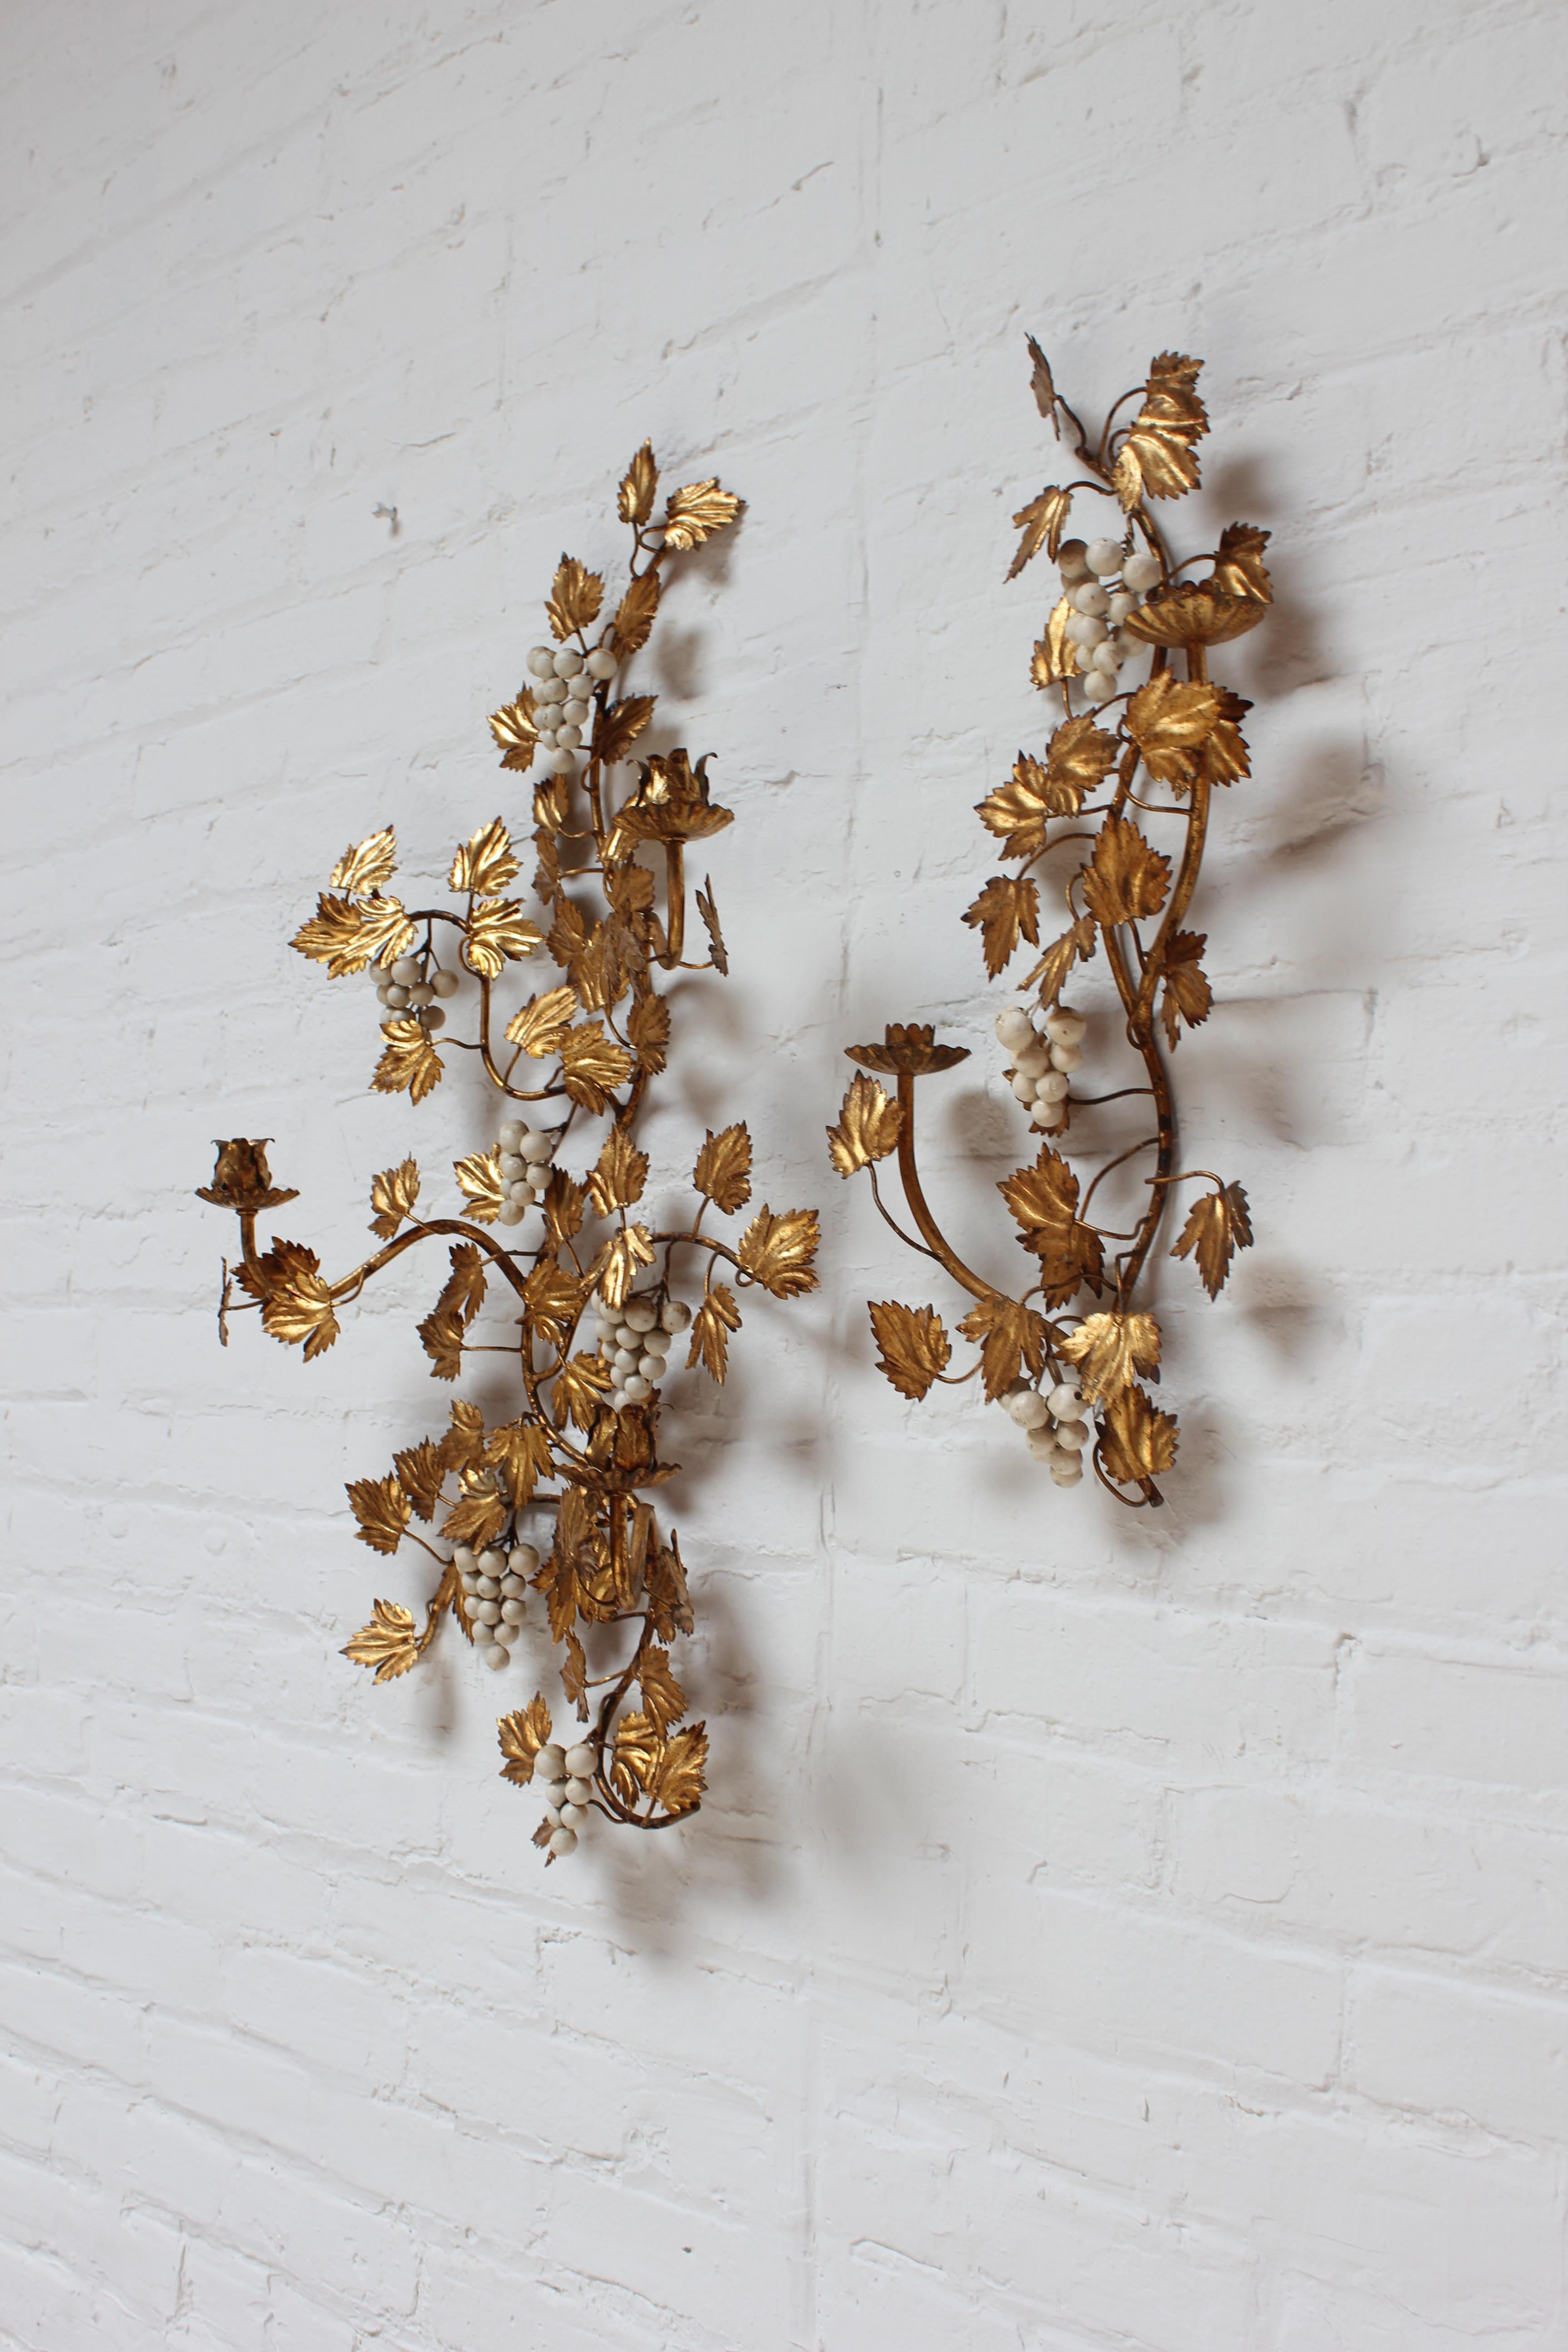 Set of Vintage Italian Gilt Tole Grapeleaf Sconces / Candleholders In Good Condition For Sale In Brooklyn, NY